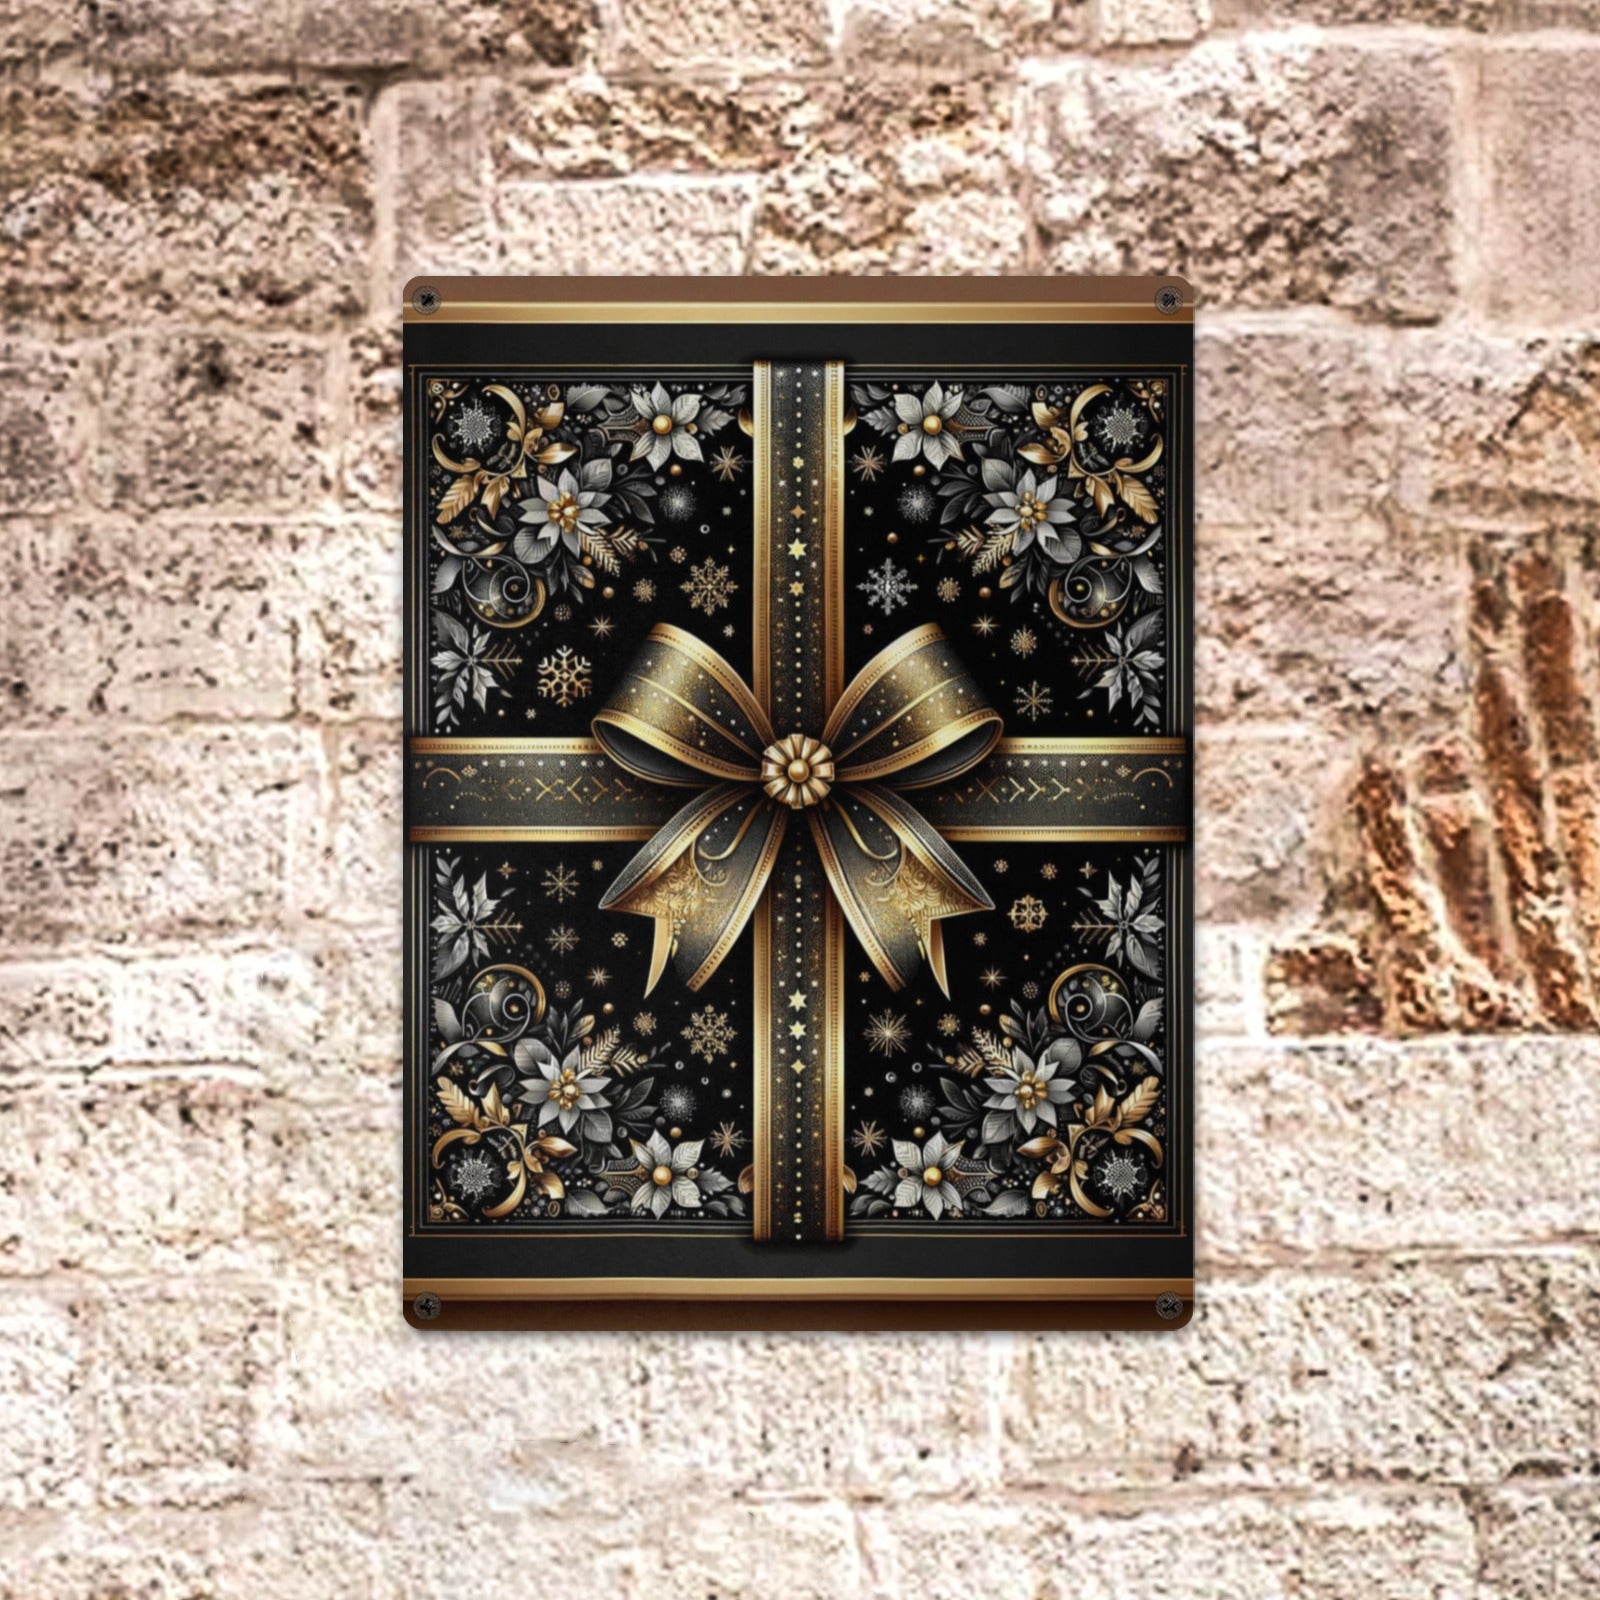 Black & Gold Gift Wrap Metal Sign | 12x16" Christmas Holiday Decor | Indoor/Outdoor Wall Art by MIWallArt